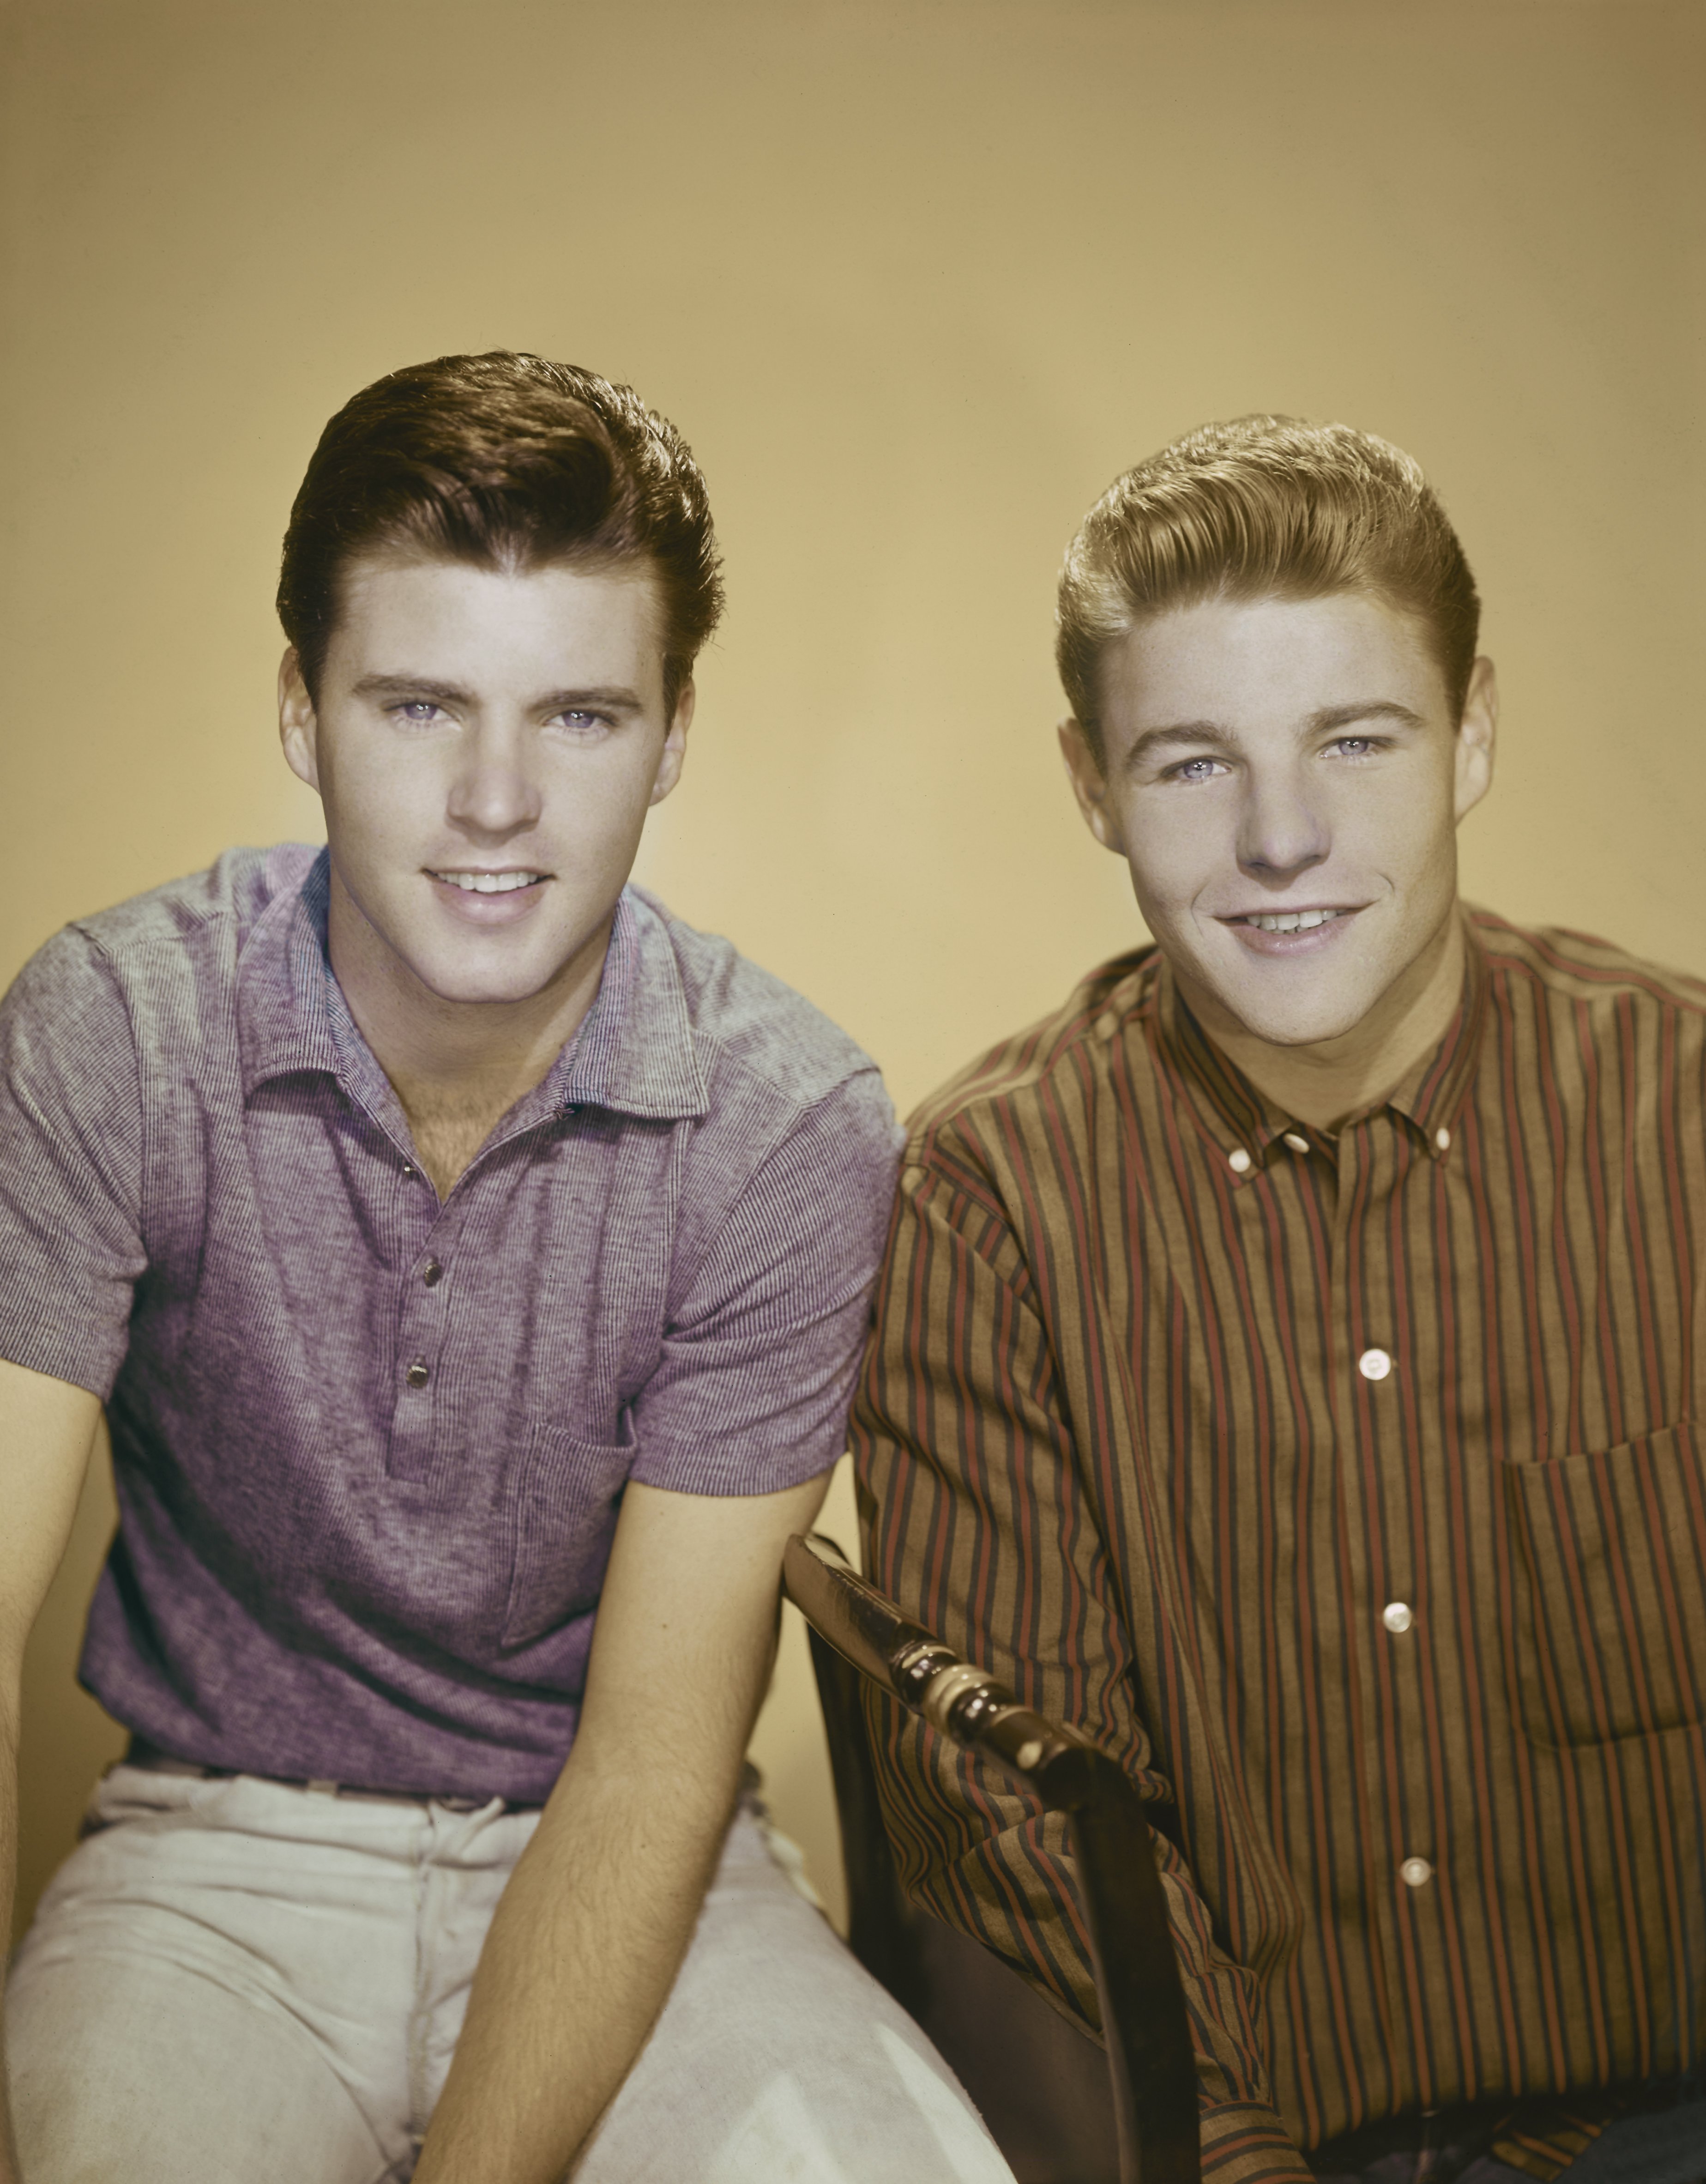 Ricky Nelson and his brother David Nelson pose for a photo in 1957. | Source: Getty Images